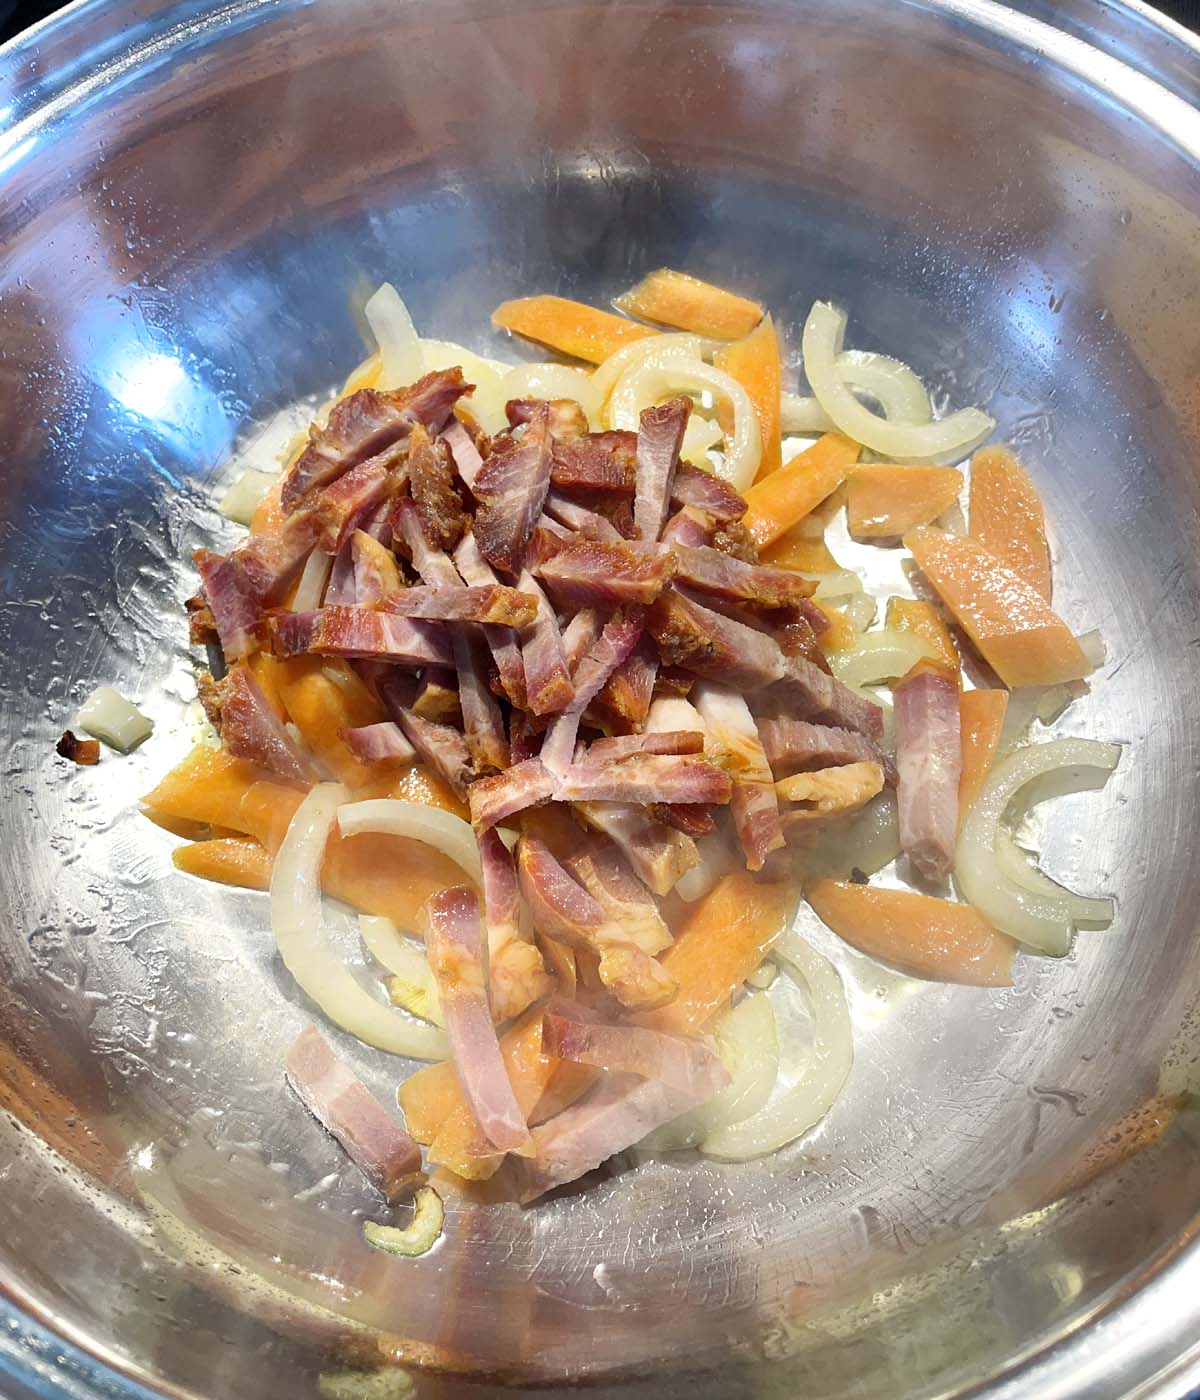 Chunks of barbecue pork, sliced onions and carrots cooking in a metal wok.